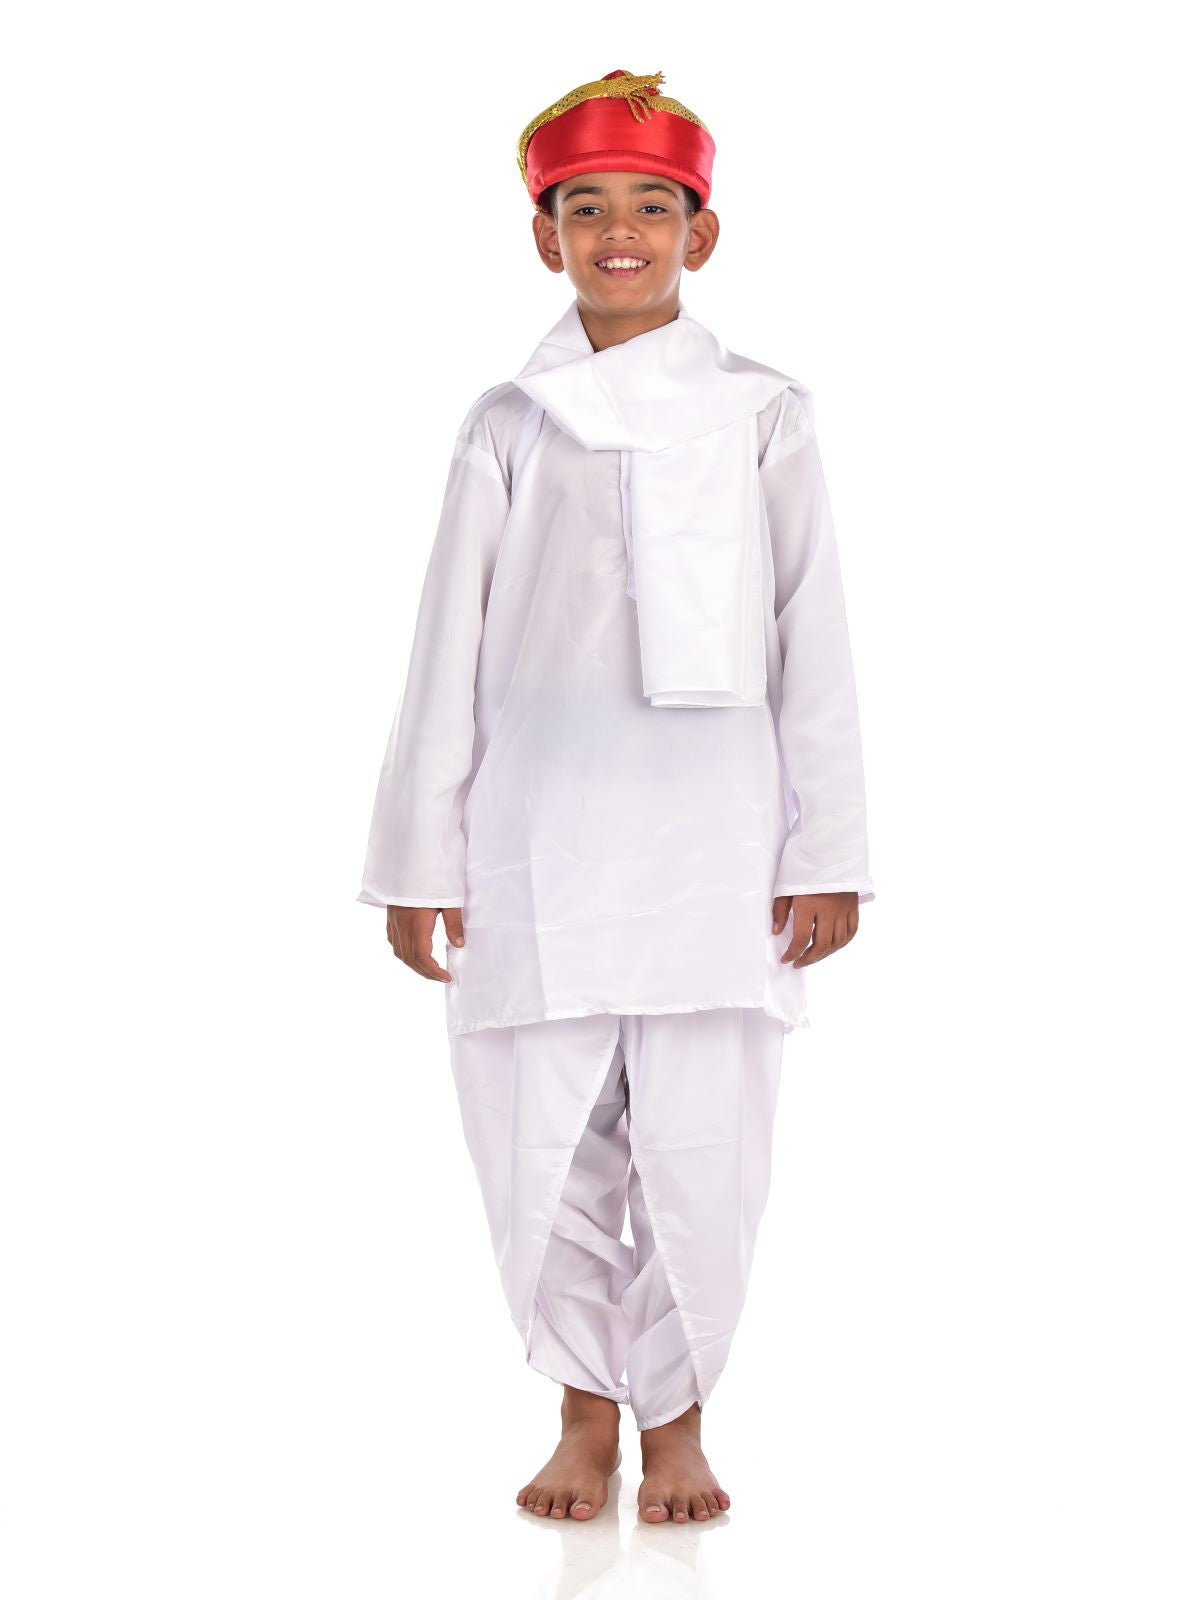 Buy BookMyCostume Swami Vivekananda Historical Personality Kids Fancy Dress  Costume 6-7 years Online at Low Prices in India - Amazon.in